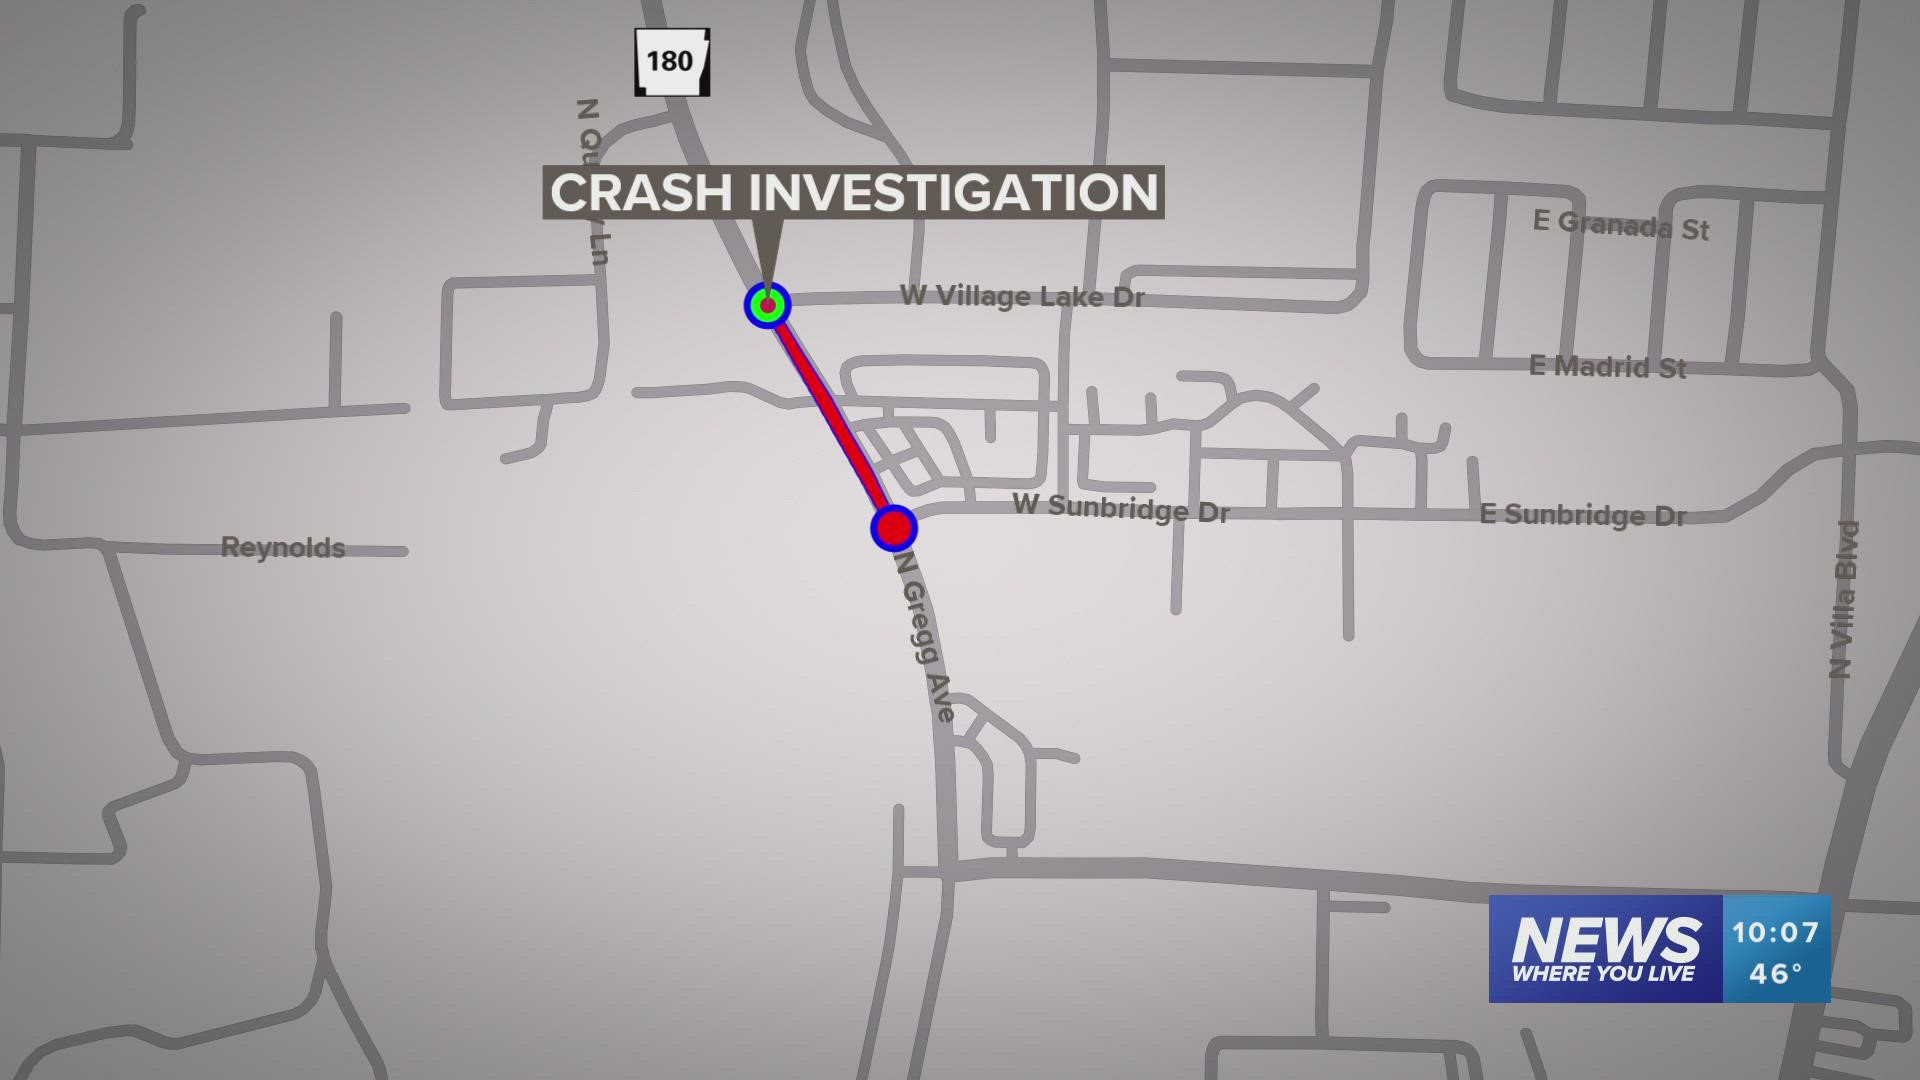 Fayetteville Police are asking drivers to avoid the area of Greg Avenue and Village Lake Drive as they investigate a vehicle vs pedestrian crash.